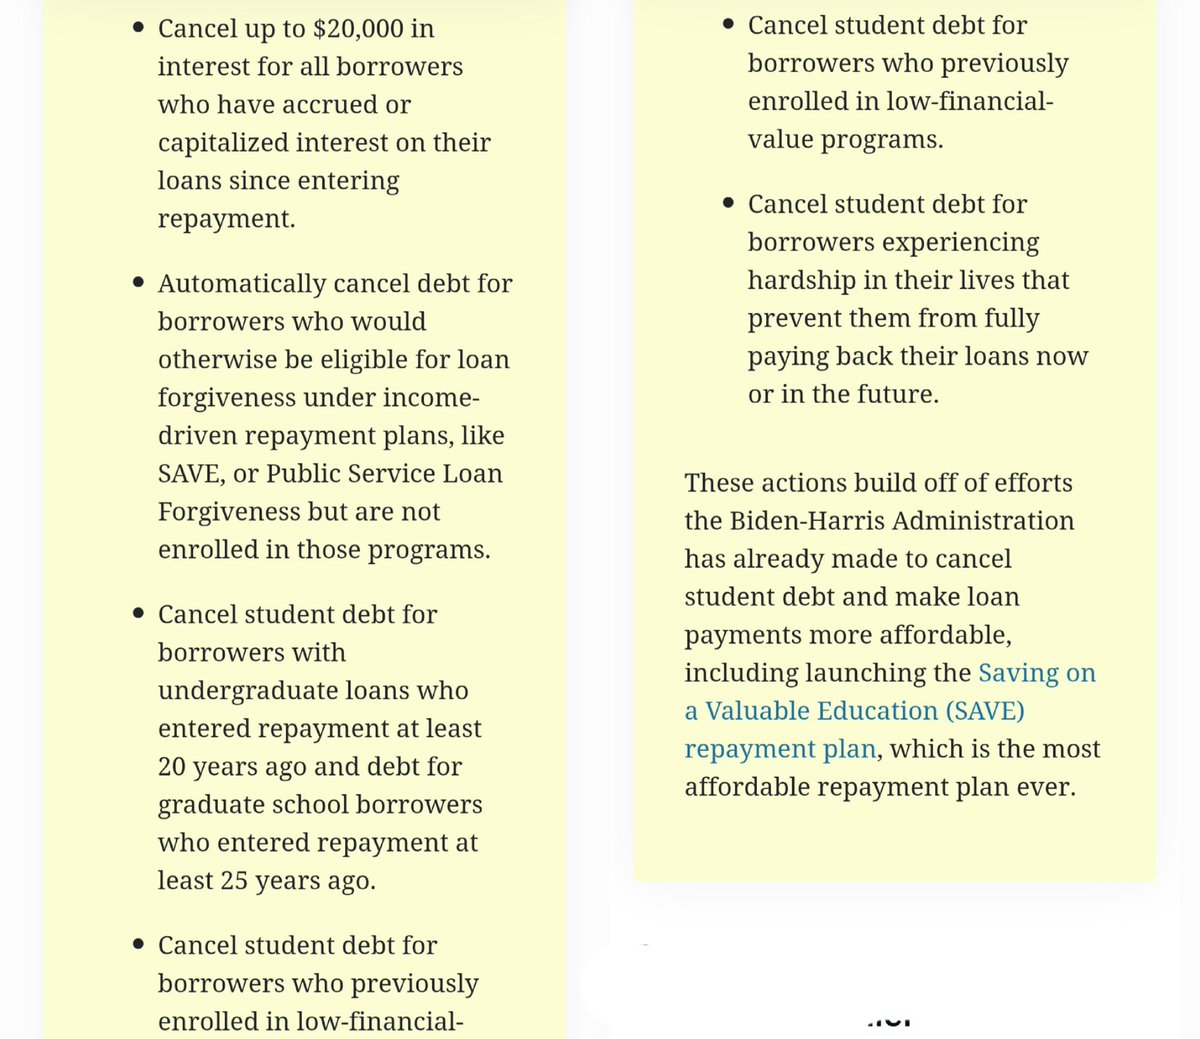 To see if your student loans qualify for forgiveness, go to: studentaid.gov/manage-loans/f…